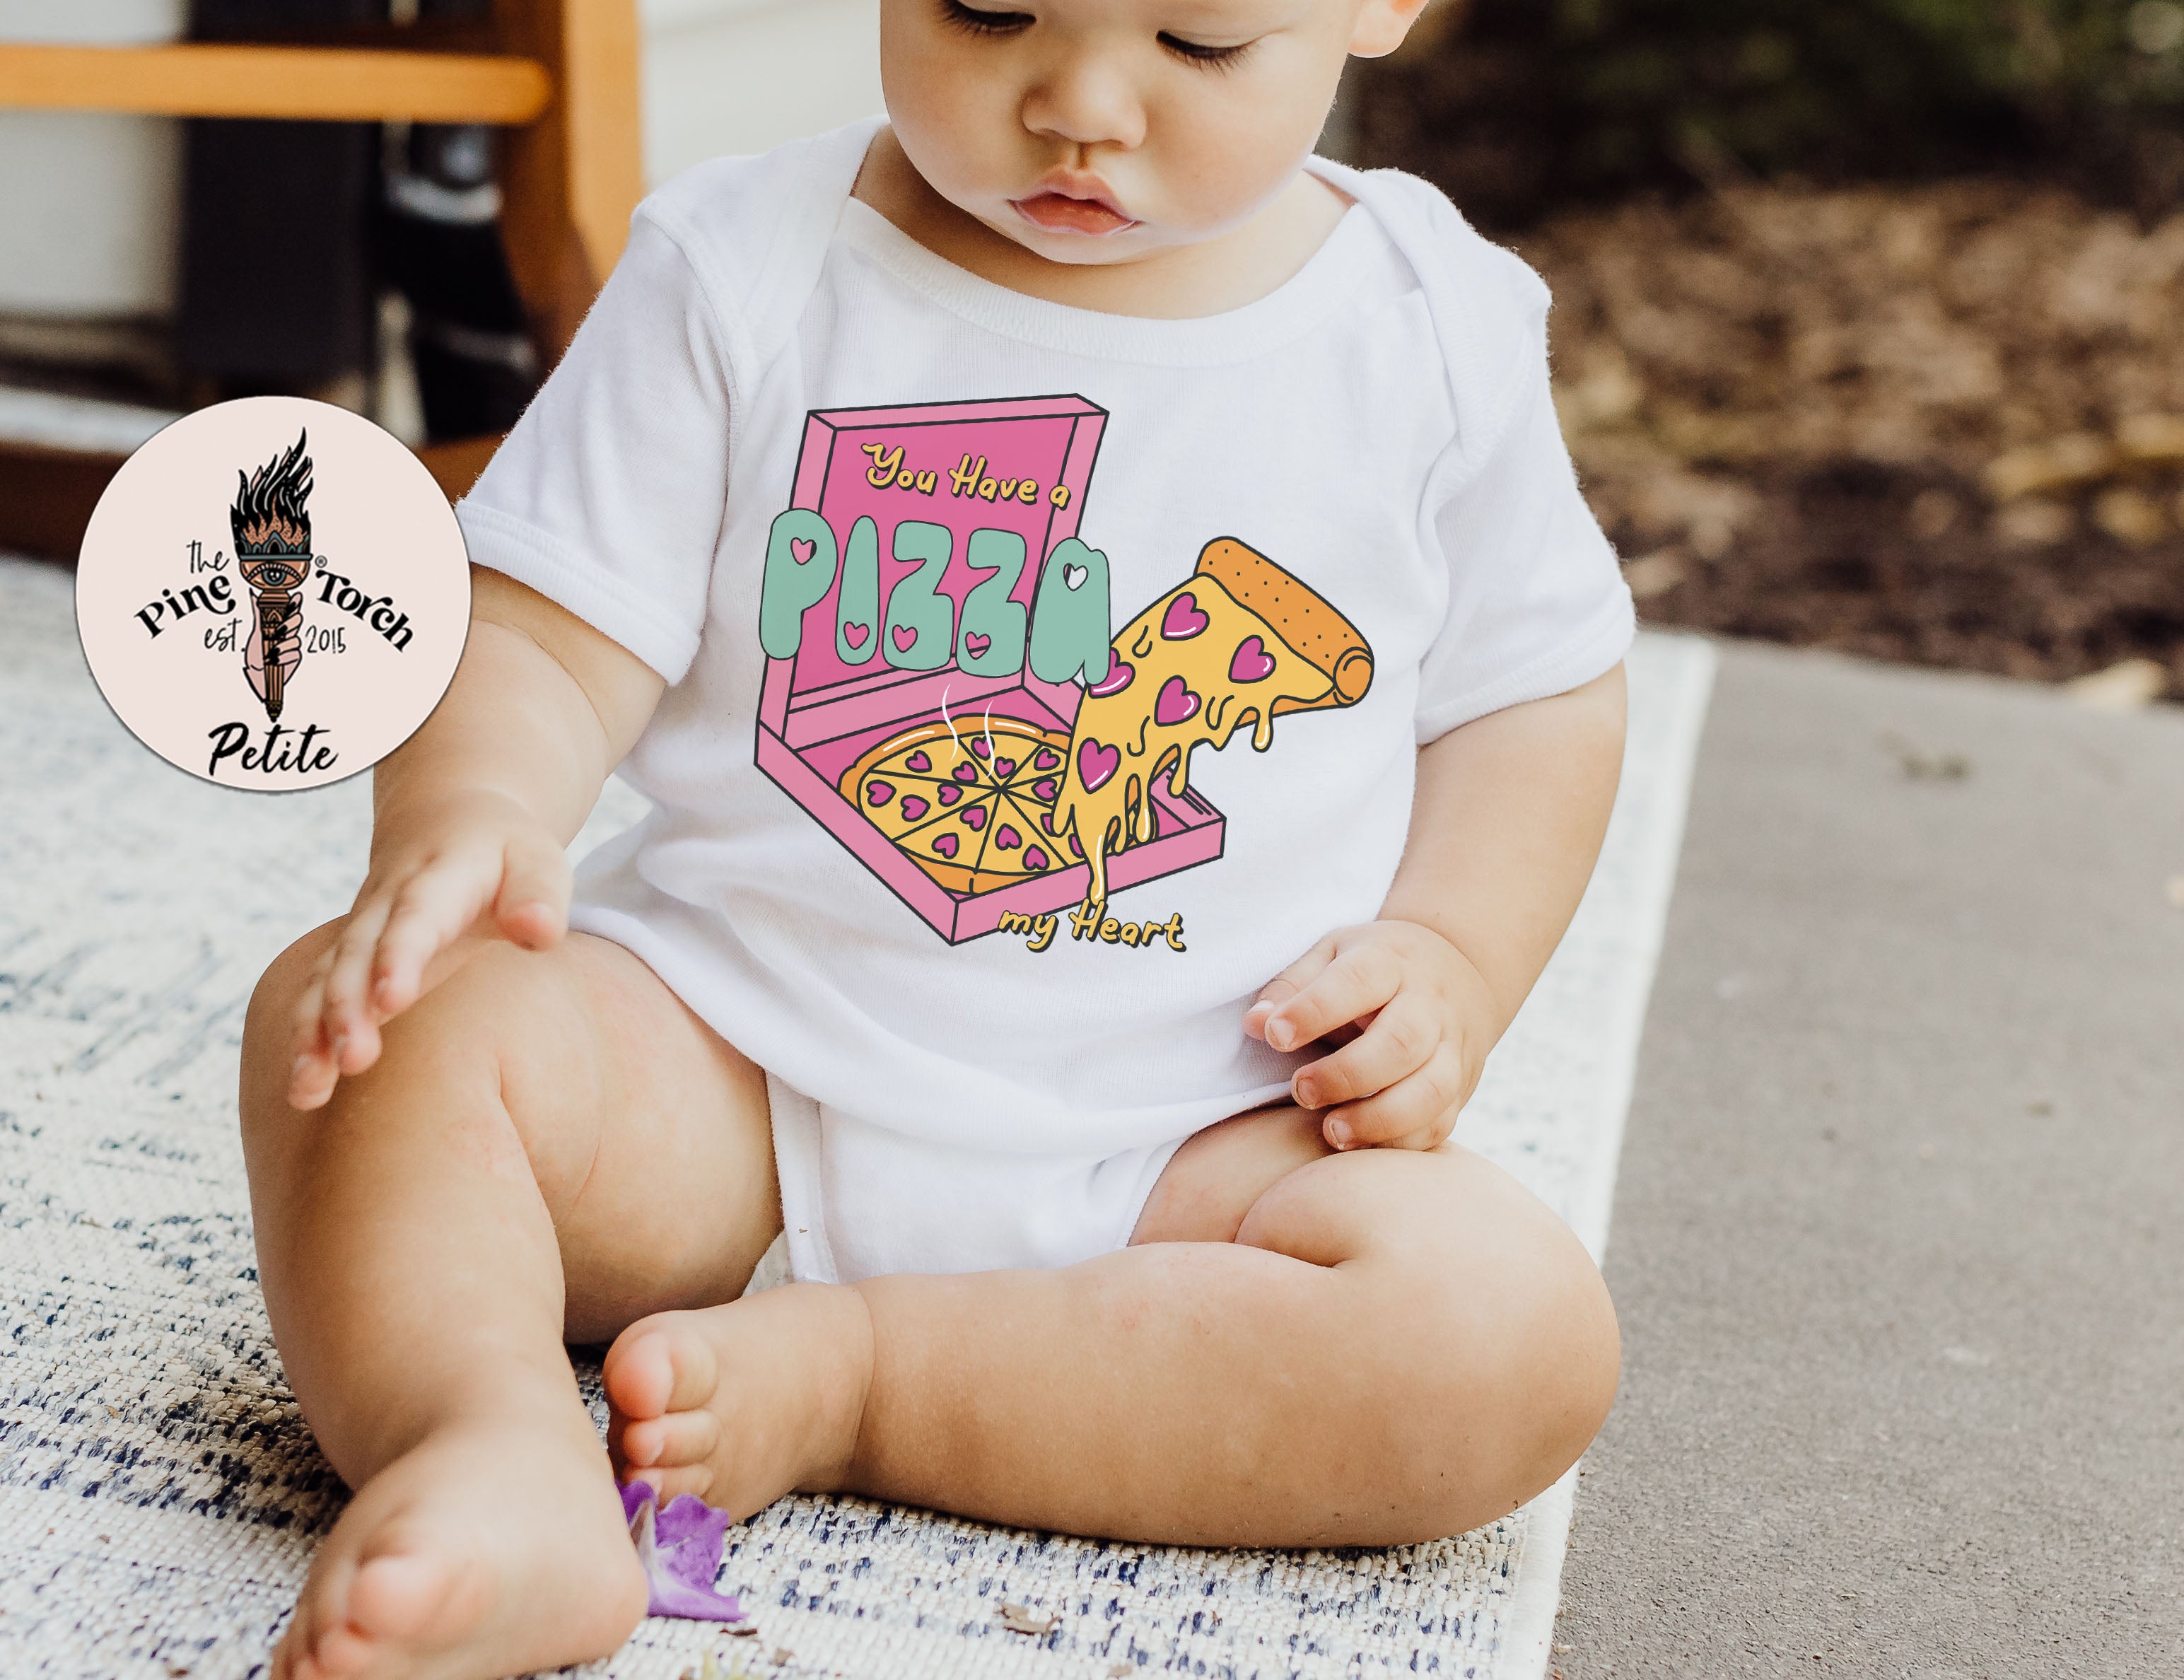 « YOU HAVE A PIZZA MY HEART » KID'S TEE